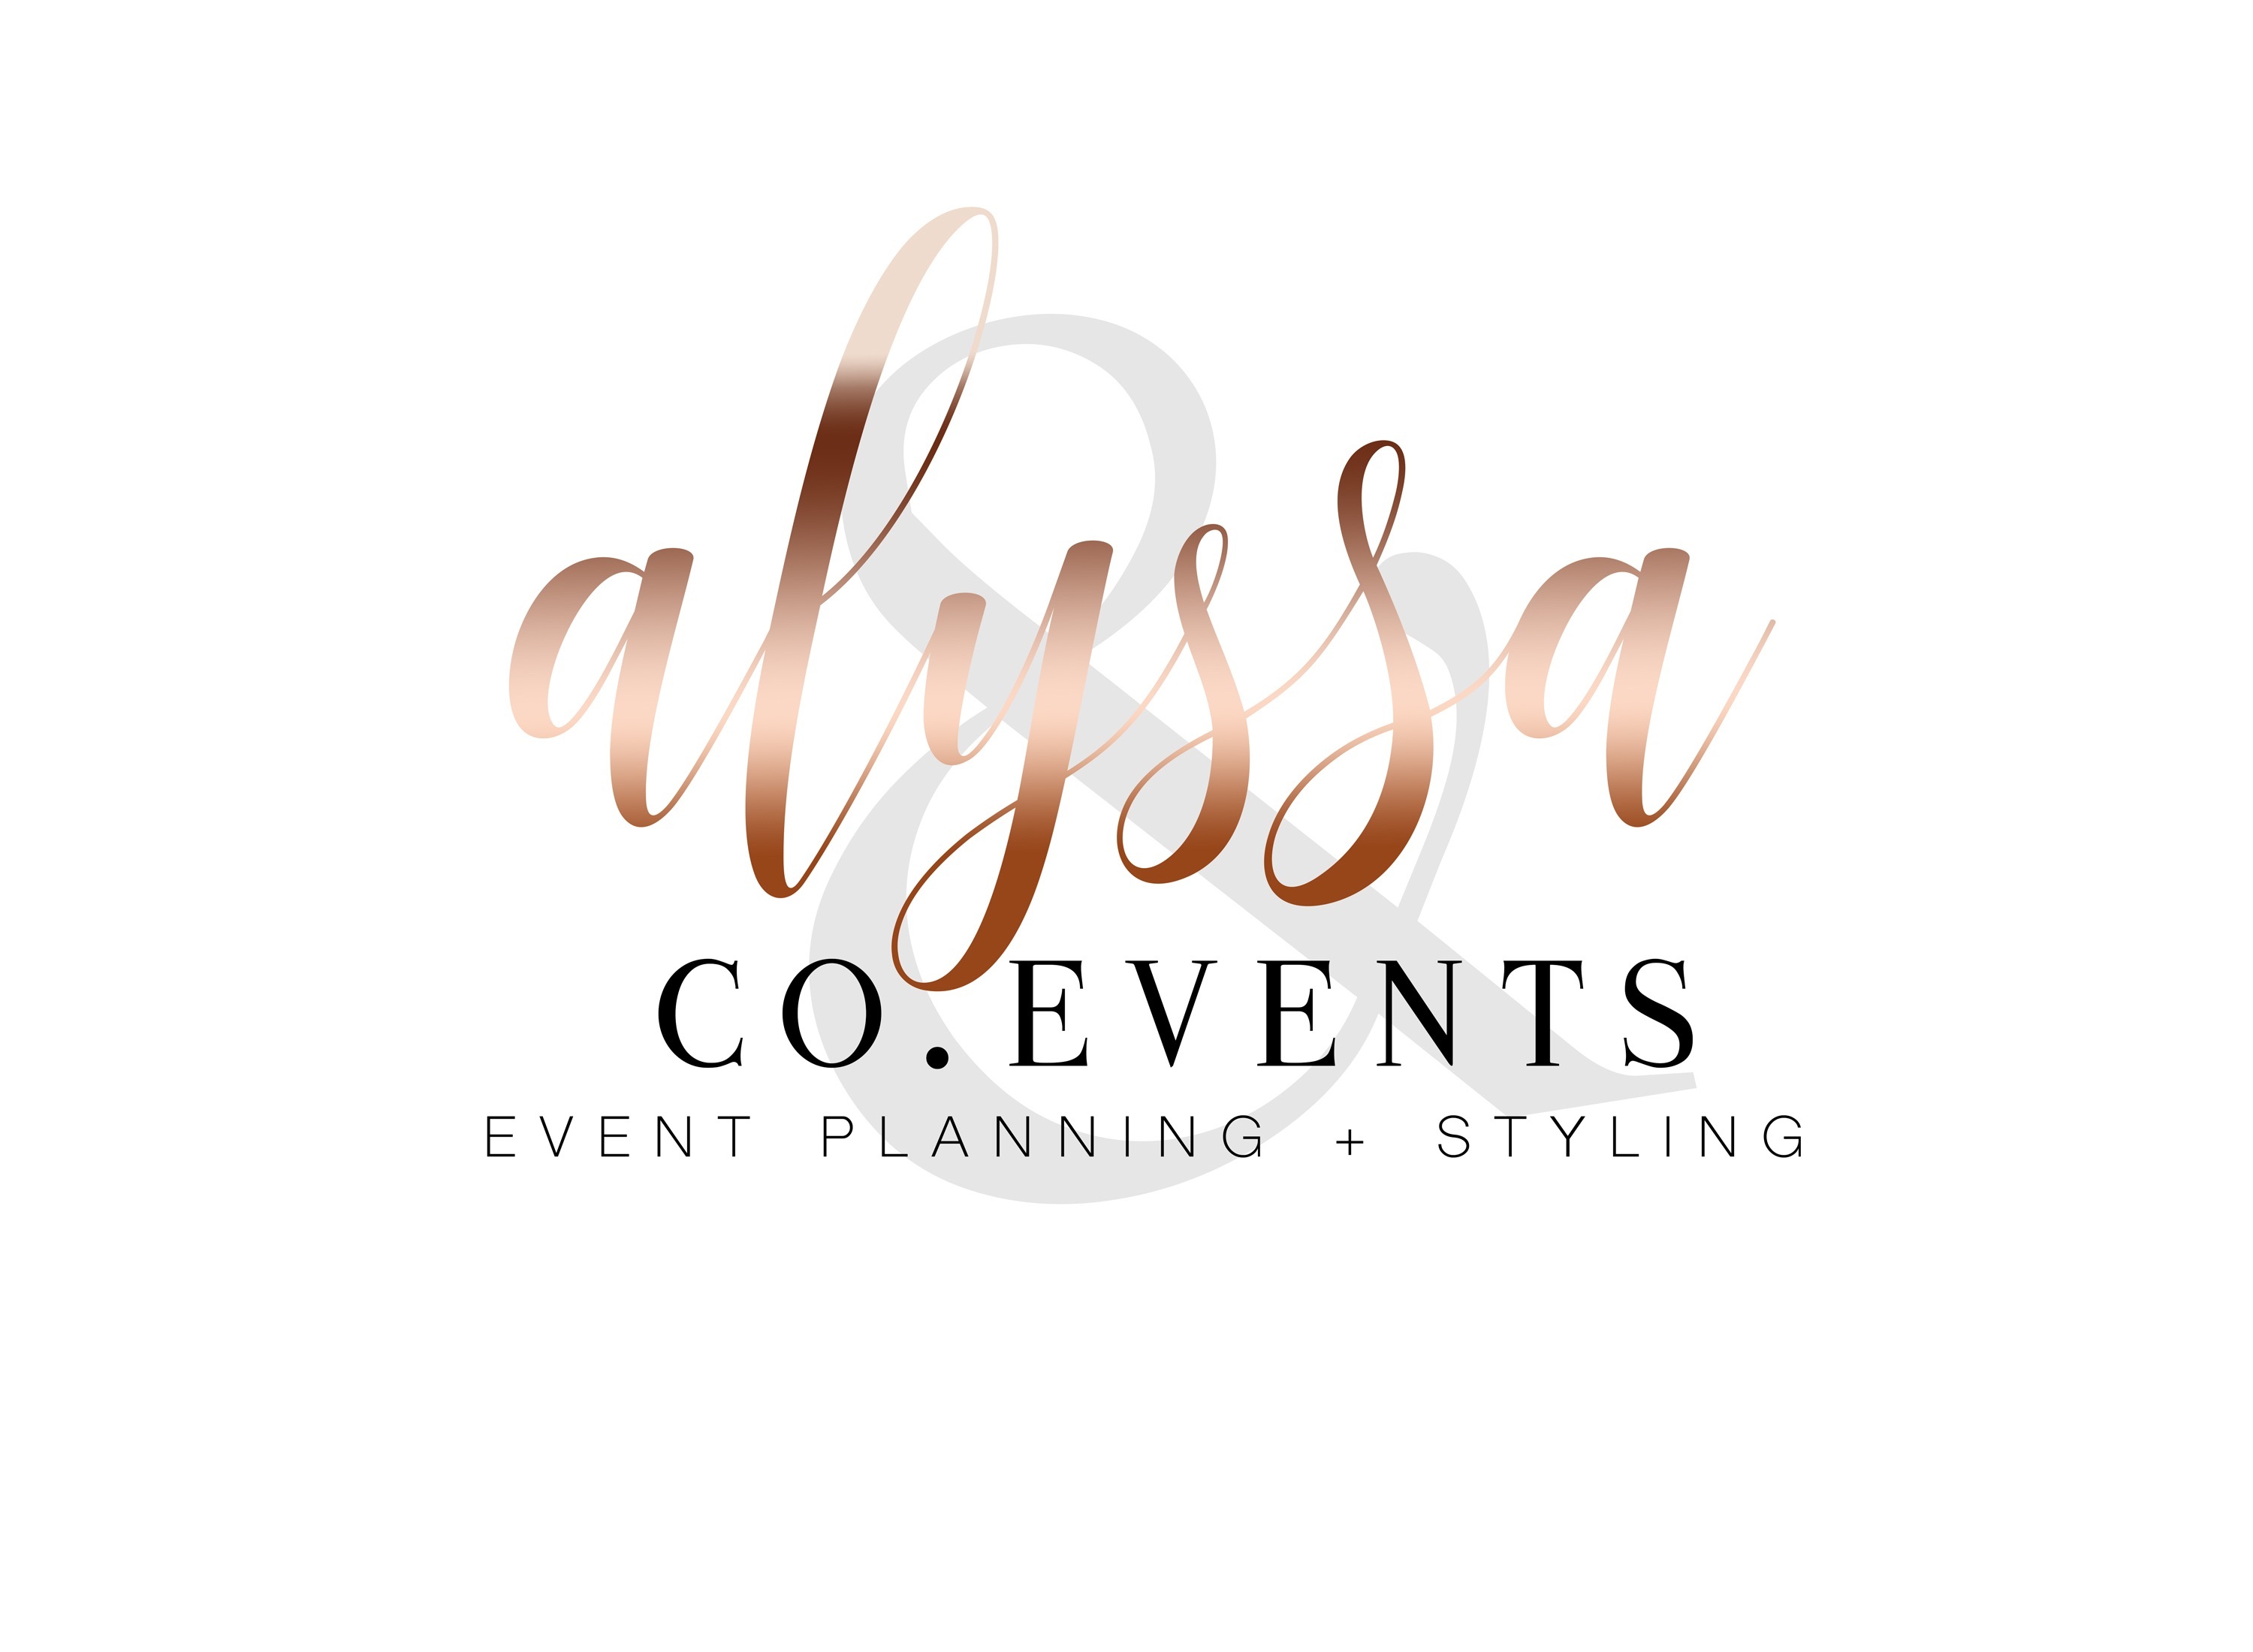 Alyssa and Co. Events